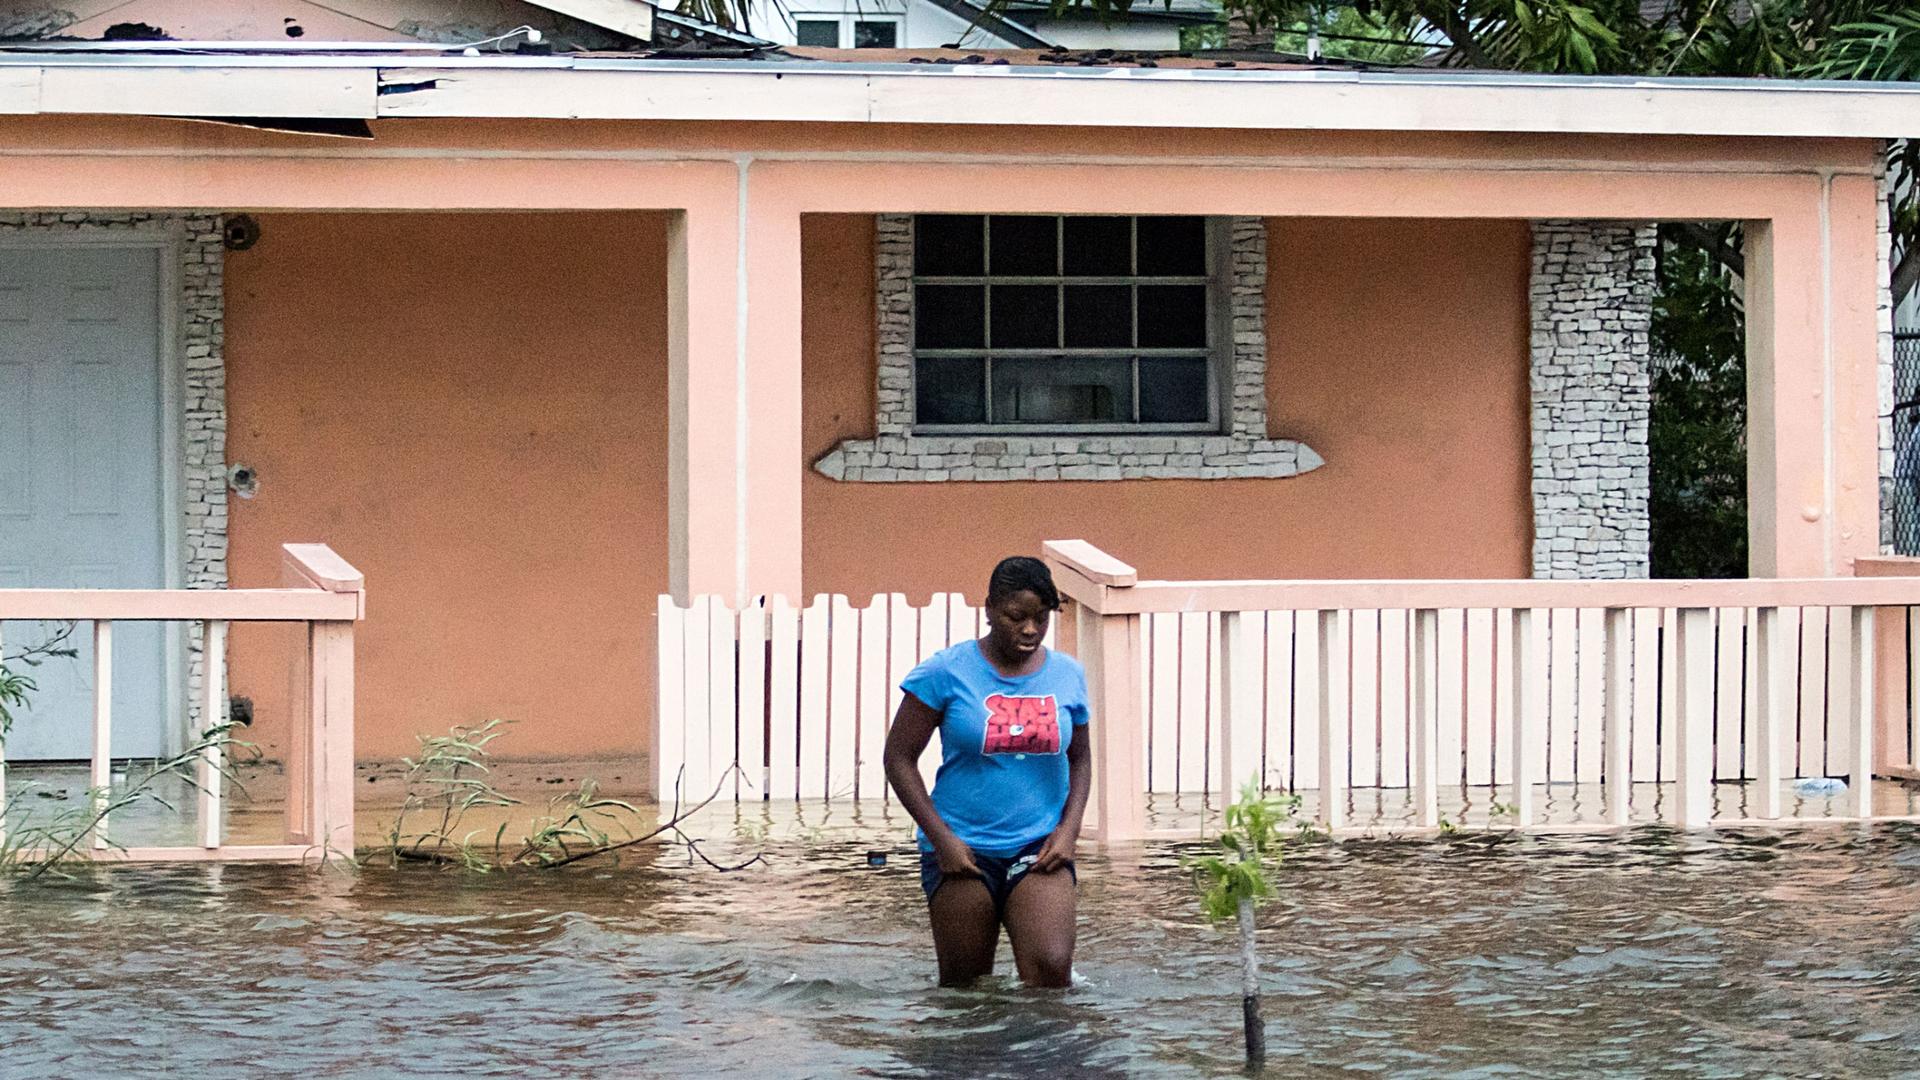 A woman is shown walking in knee-deep water in front of a peach-colored home.